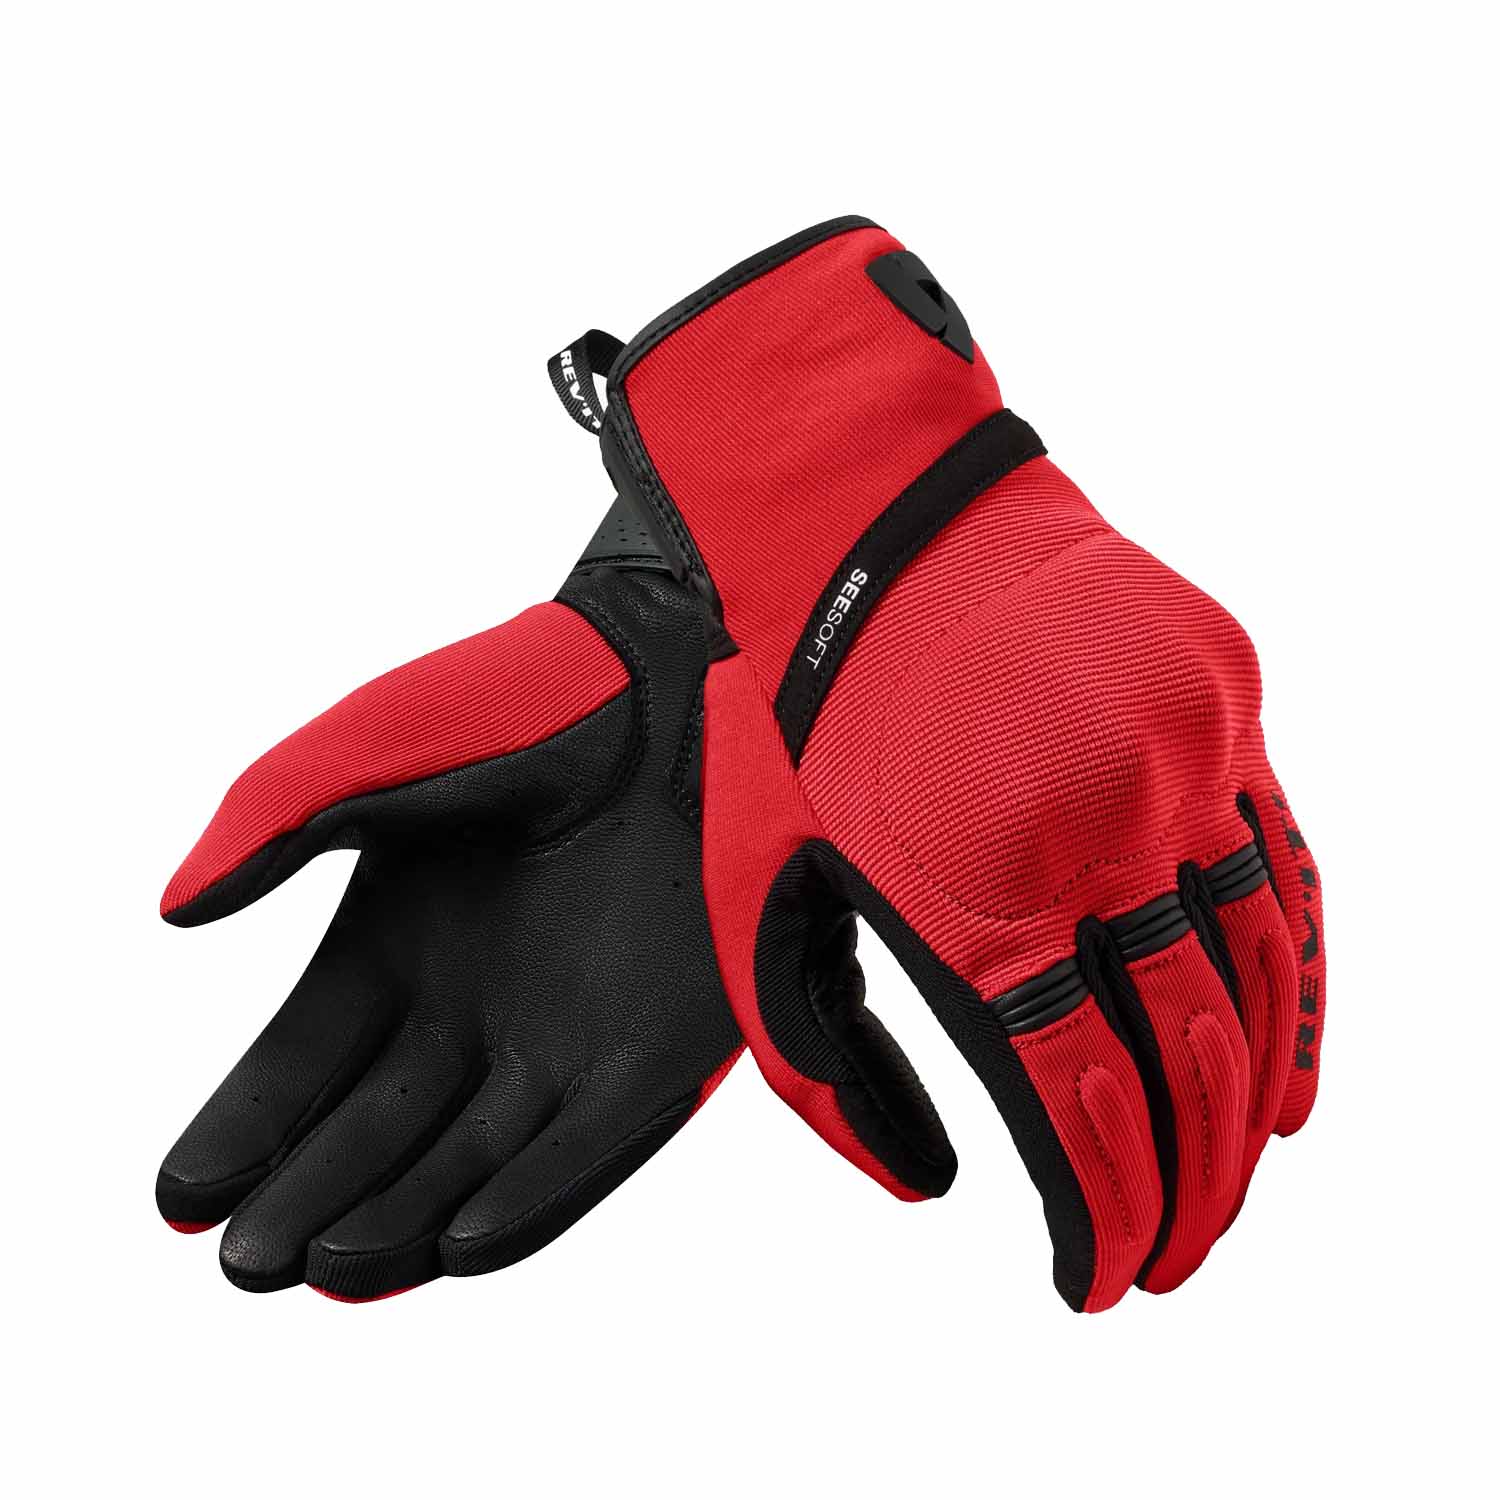 Image of REV'IT! Mosca 2 Gloves Red Black Talla 2XL